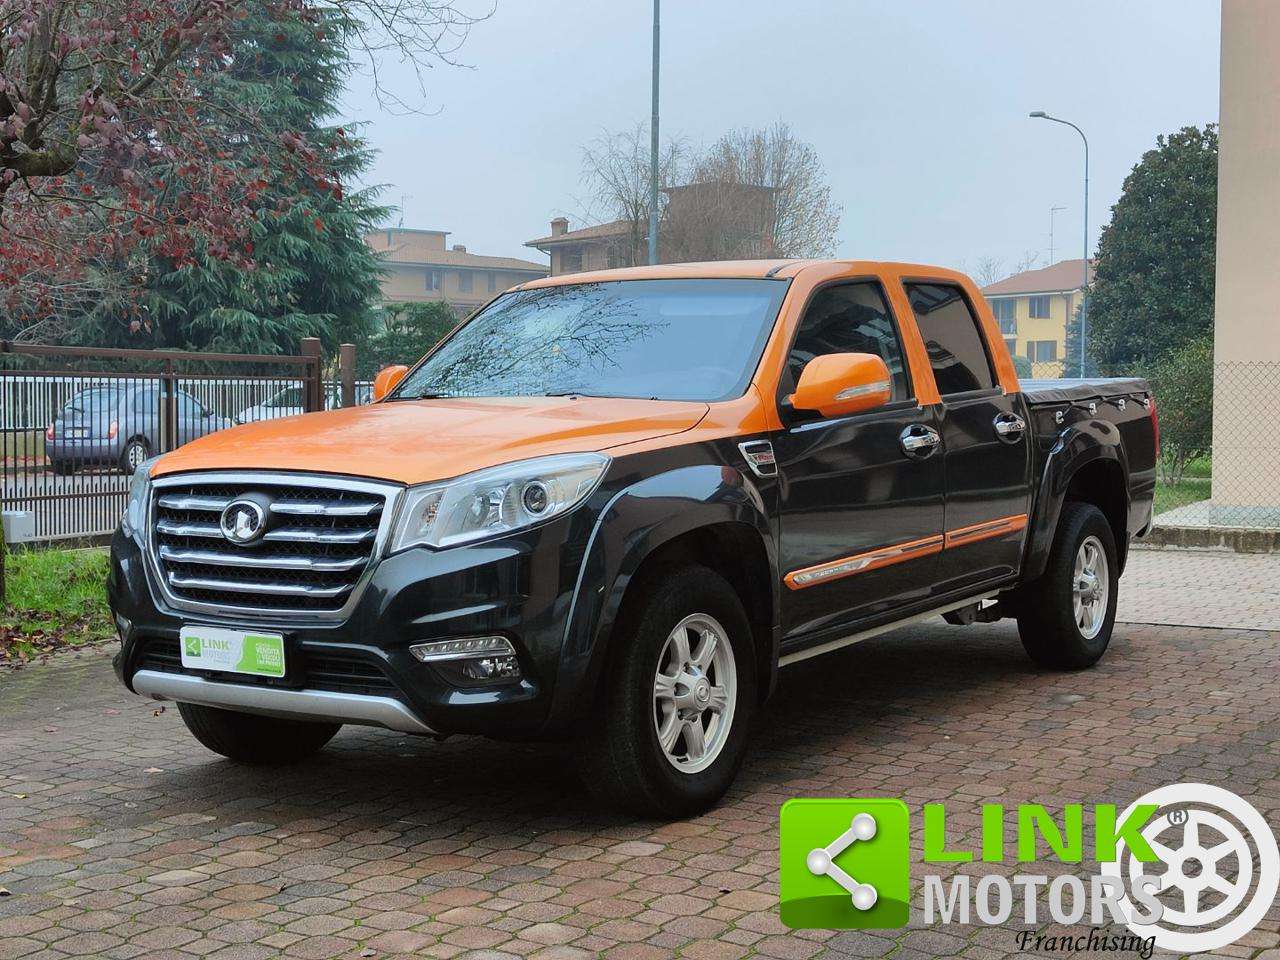 Great Wall Steed Off-Road/Pick-up in Orange used in Cava Manara - Pavia for € 17,600.-